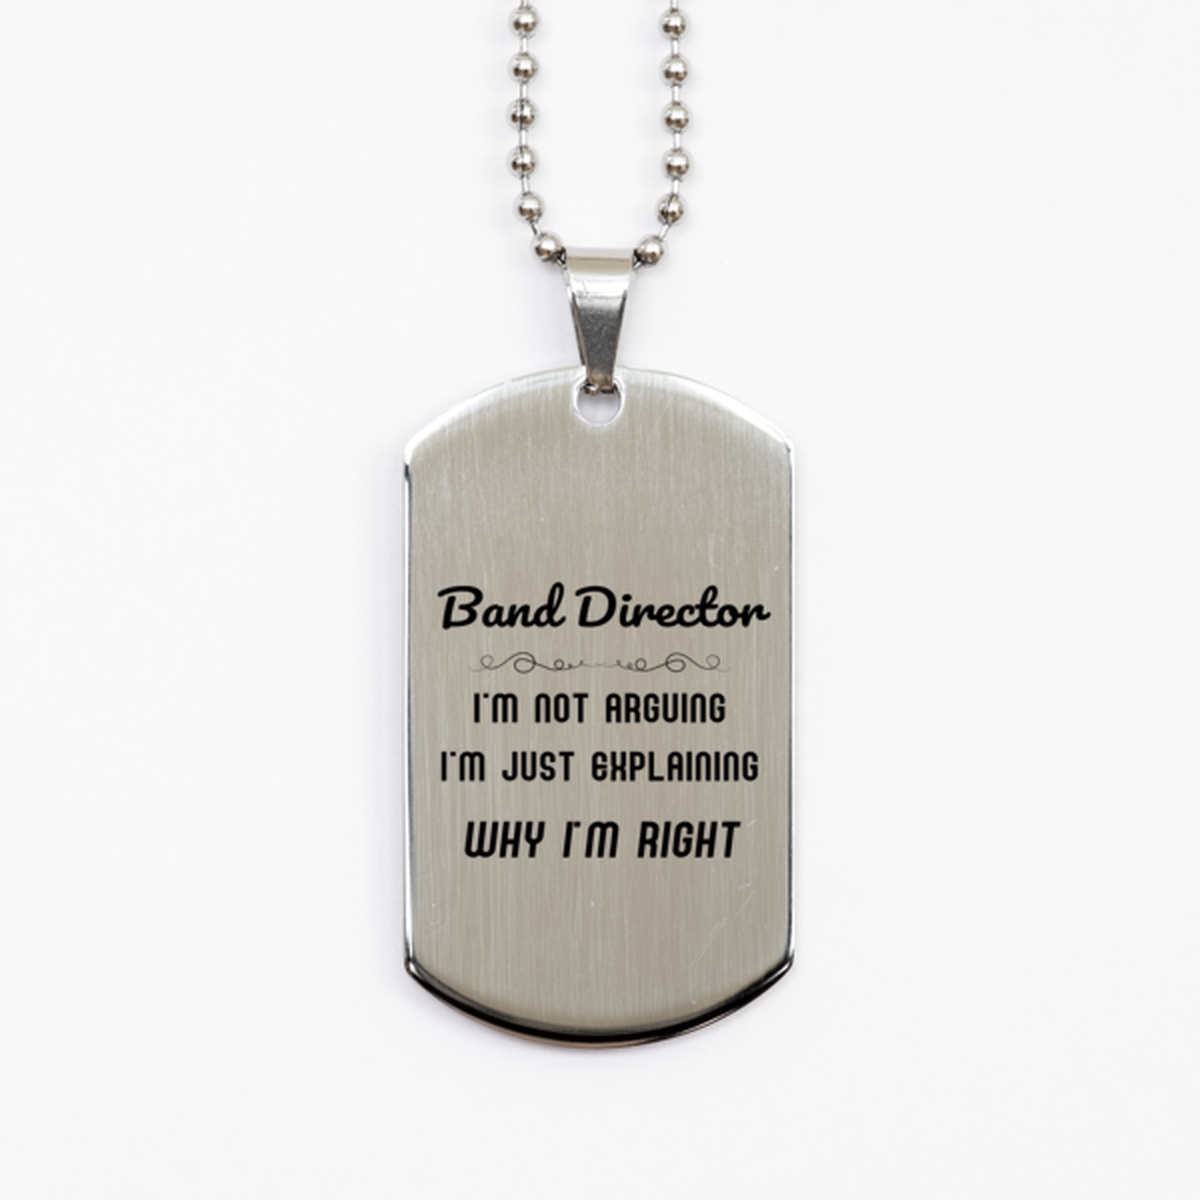 Band Director I'm not Arguing. I'm Just Explaining Why I'm RIGHT Silver Dog Tag, Funny Saying Quote Band Director Gifts For Band Director Graduation Birthday Christmas Gifts for Men Women Coworker